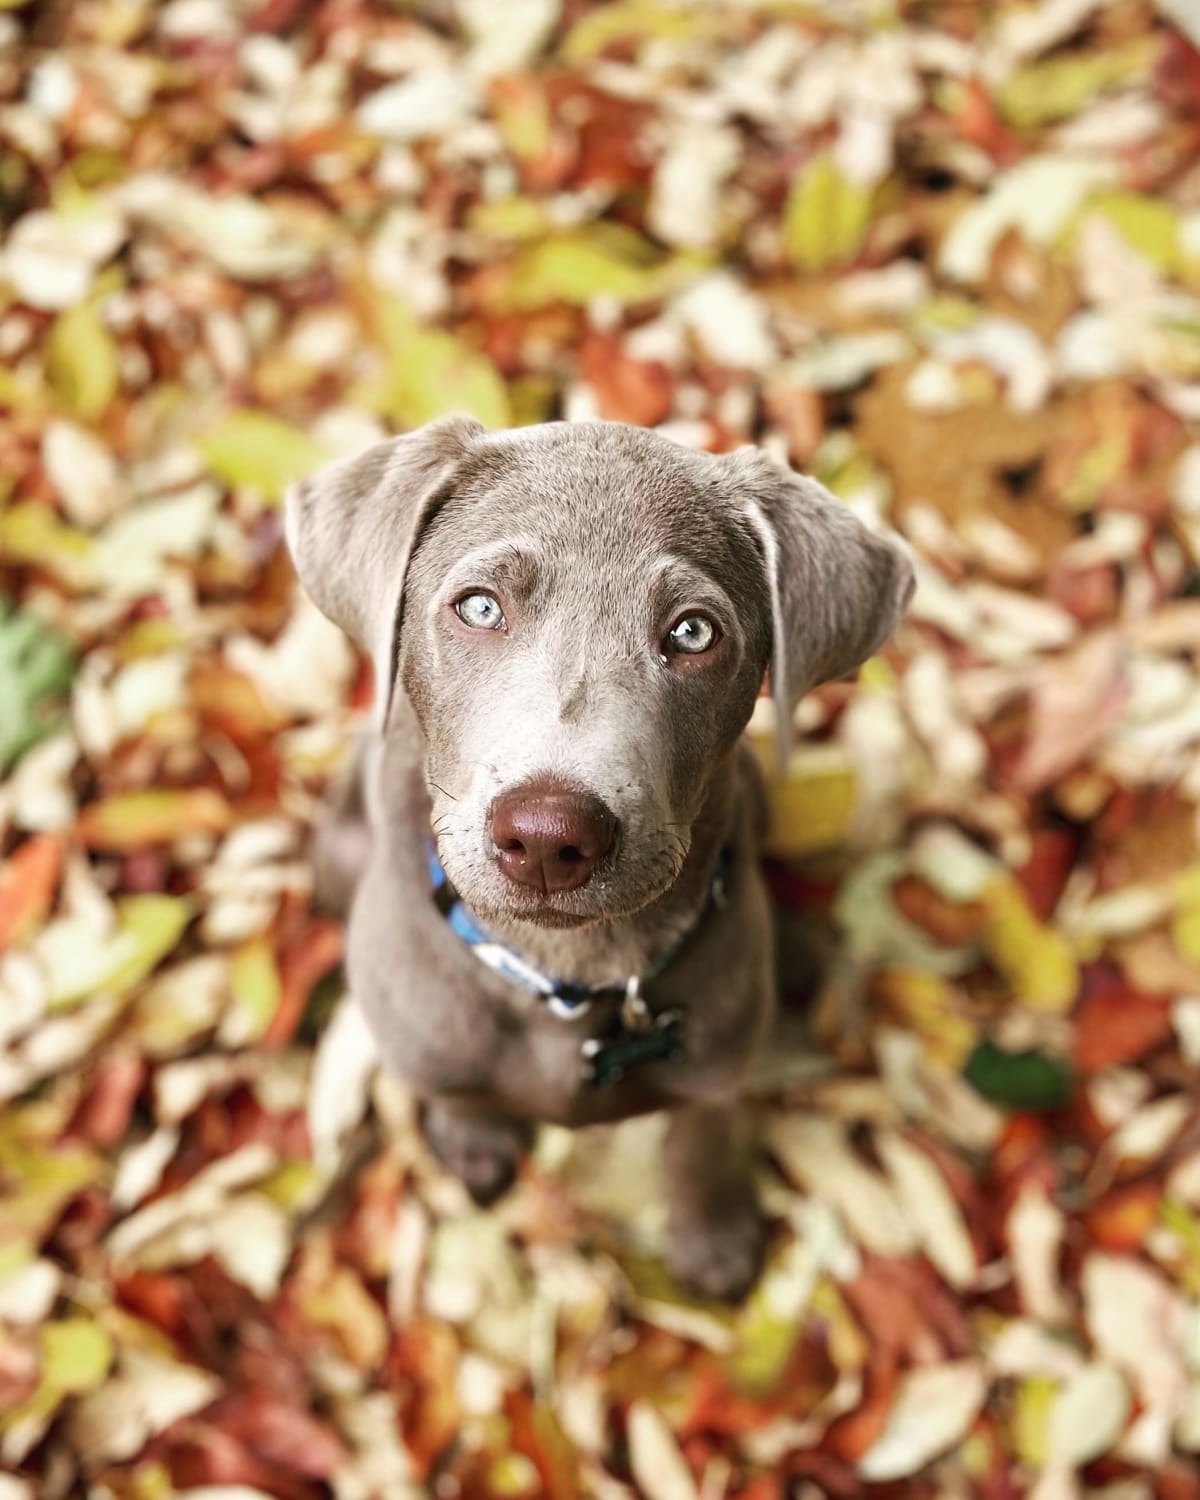 ITAP of my pup in some newly fallen leaves.